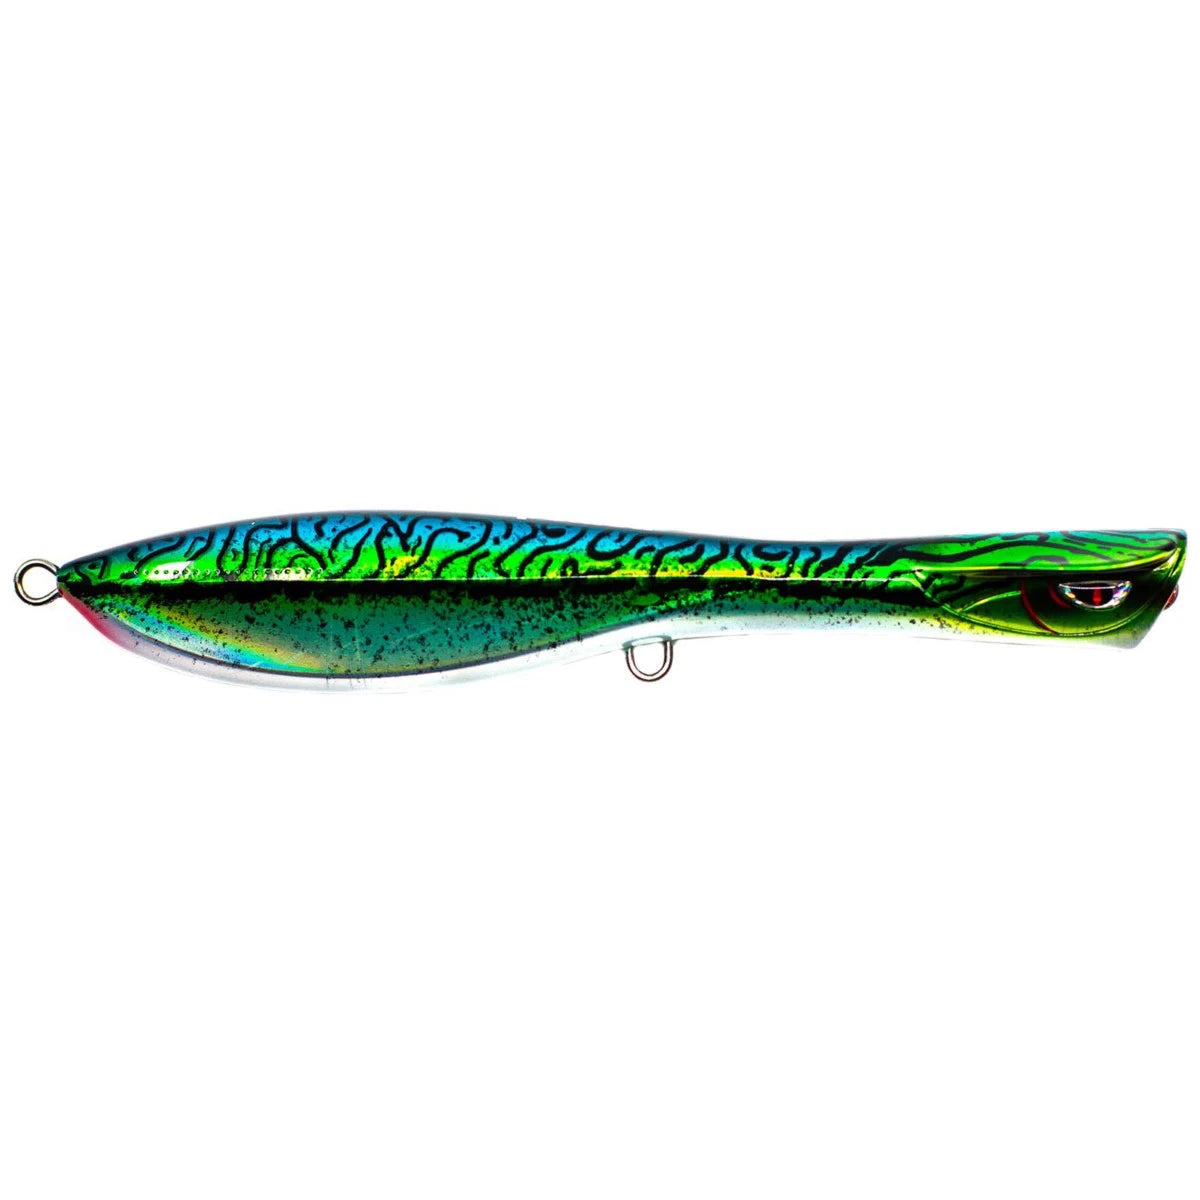 Nomad Dartwing Long Cast Sinking 130mm Lure-Lure - Poppers, Stickbaits & Pencils-Nomad-Silver Green Mackerel-Fishing Station